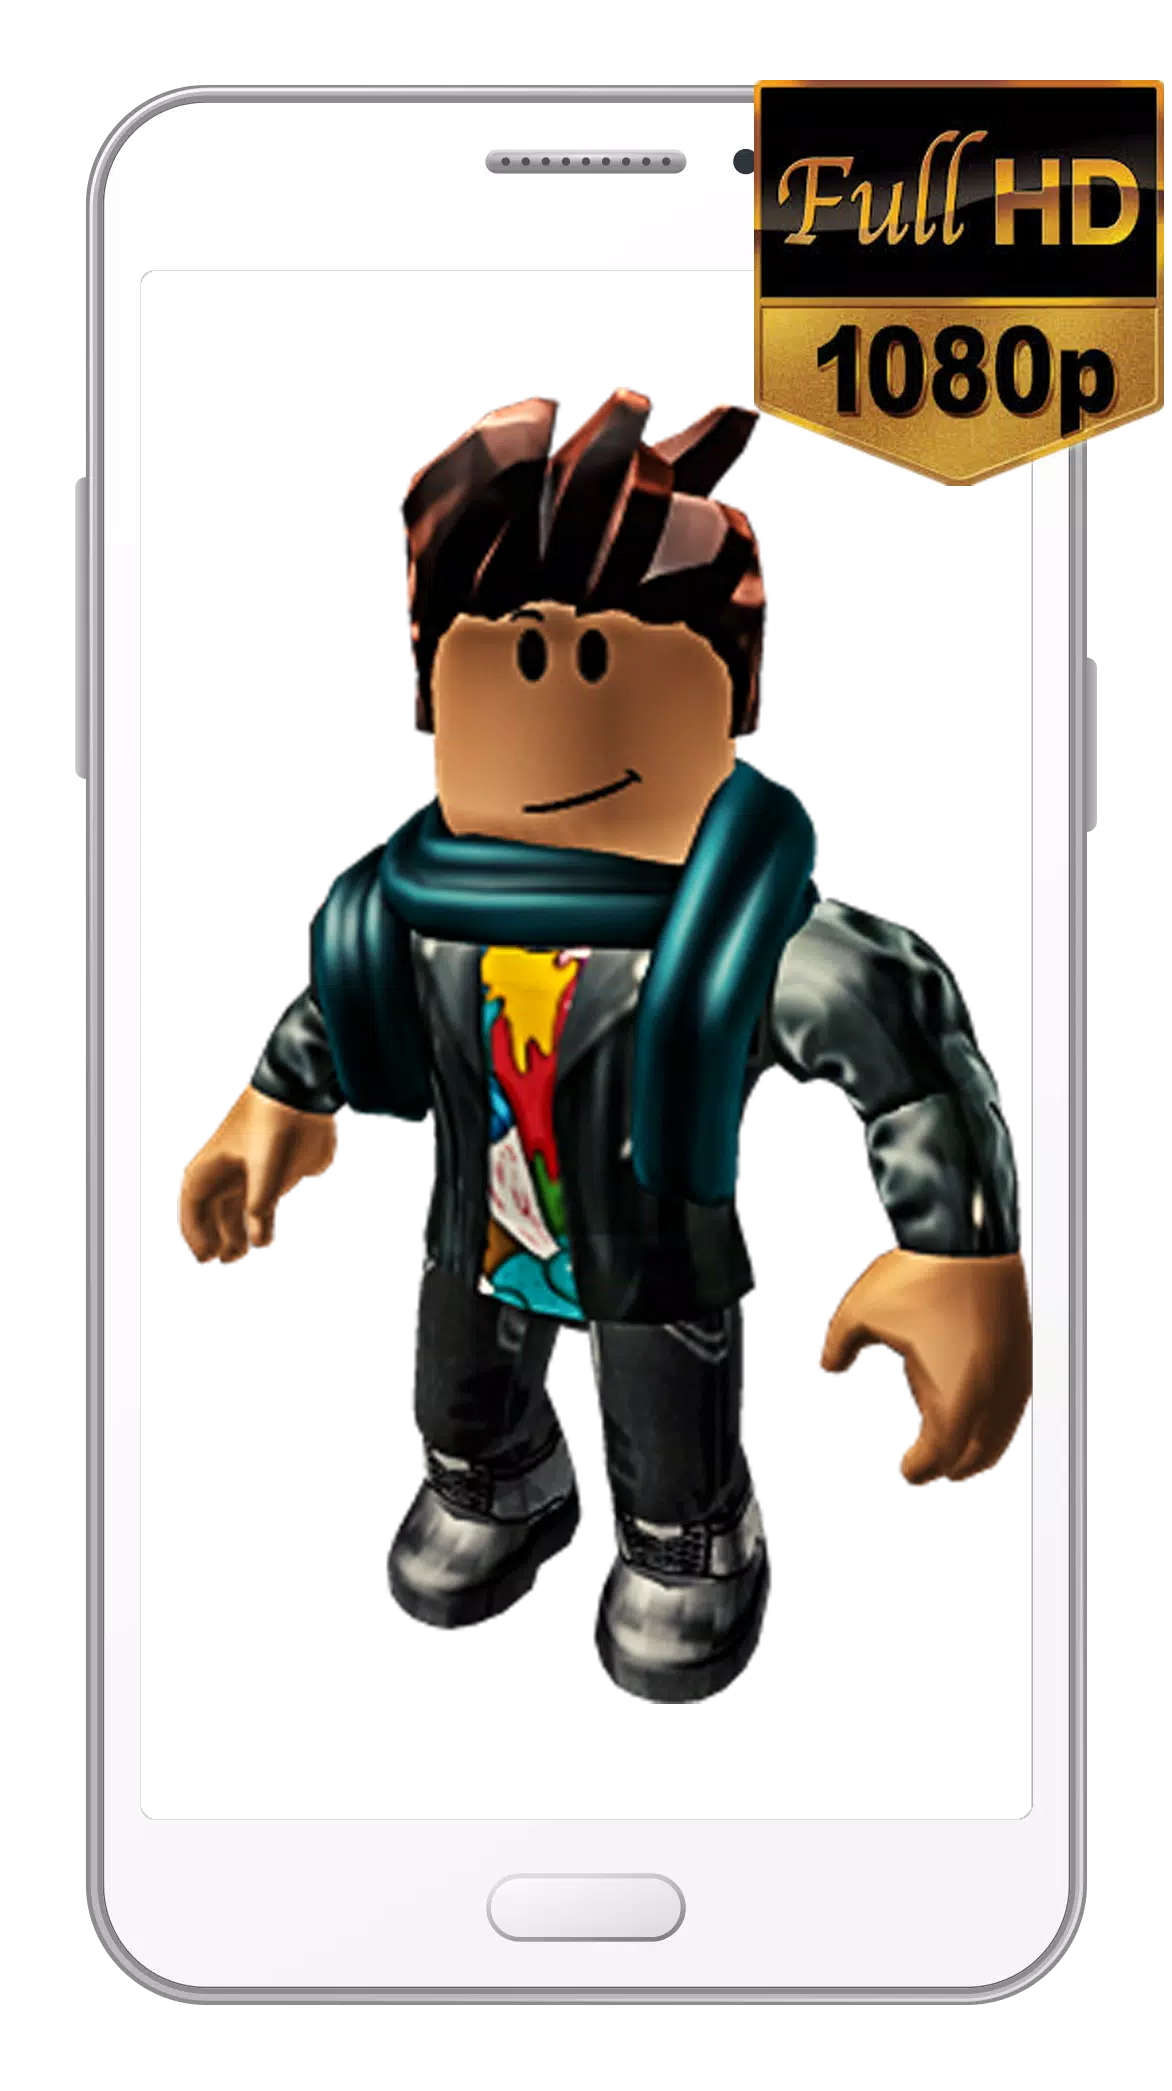 Roblox wallpaper HD APK for Android Download